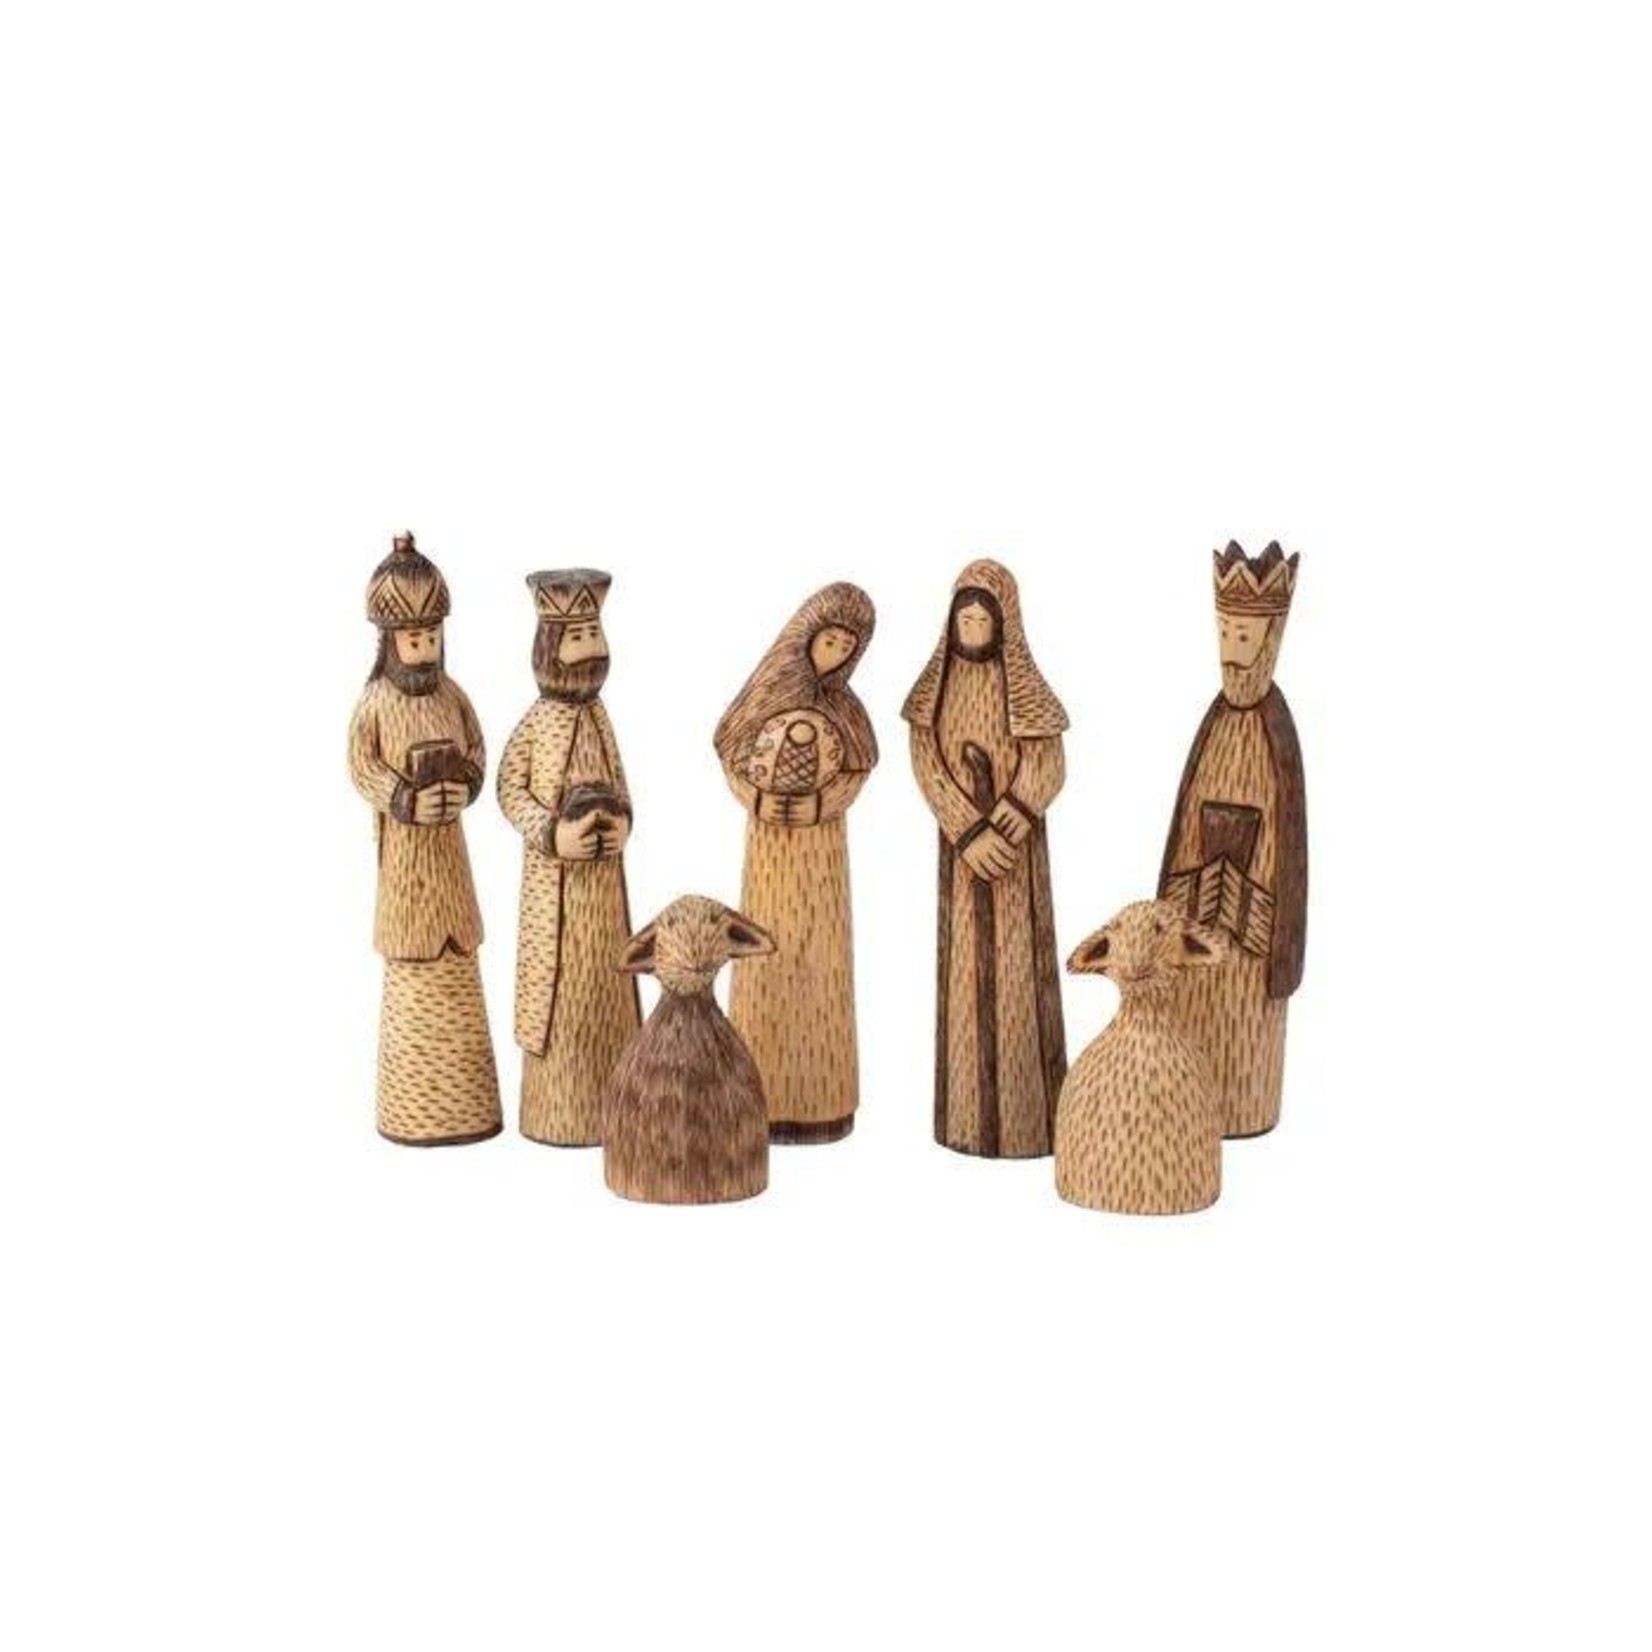 Indonesia Nativity W/Wisemen/Goats S/7 Carved Wood